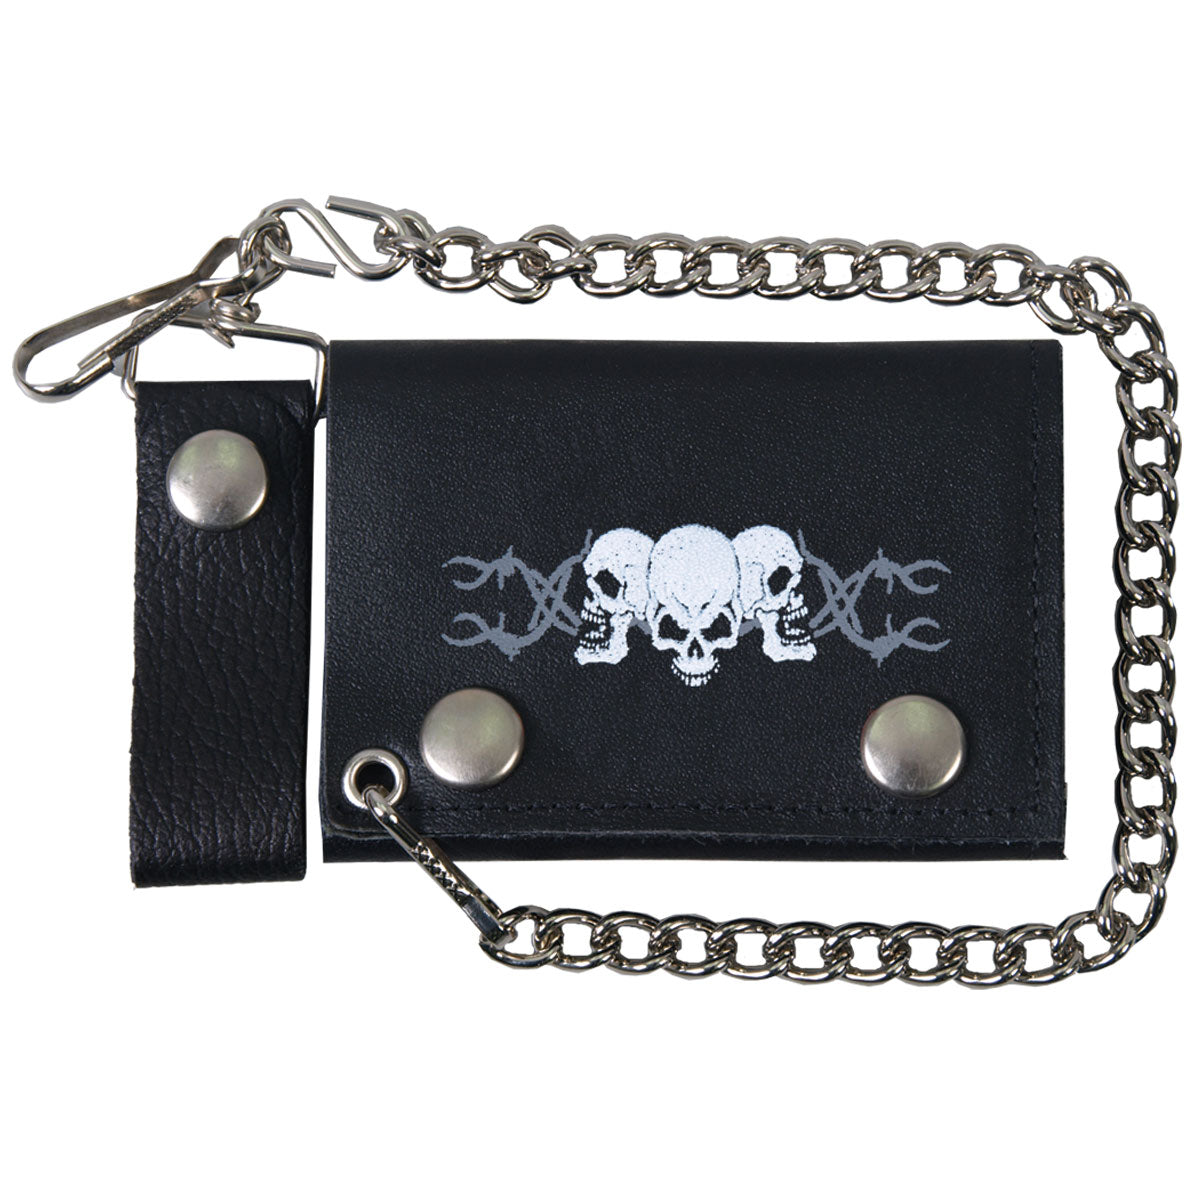 Hot Leathers WLB1014 Barbed Wire Skulls Black Leather Wallet with Chain